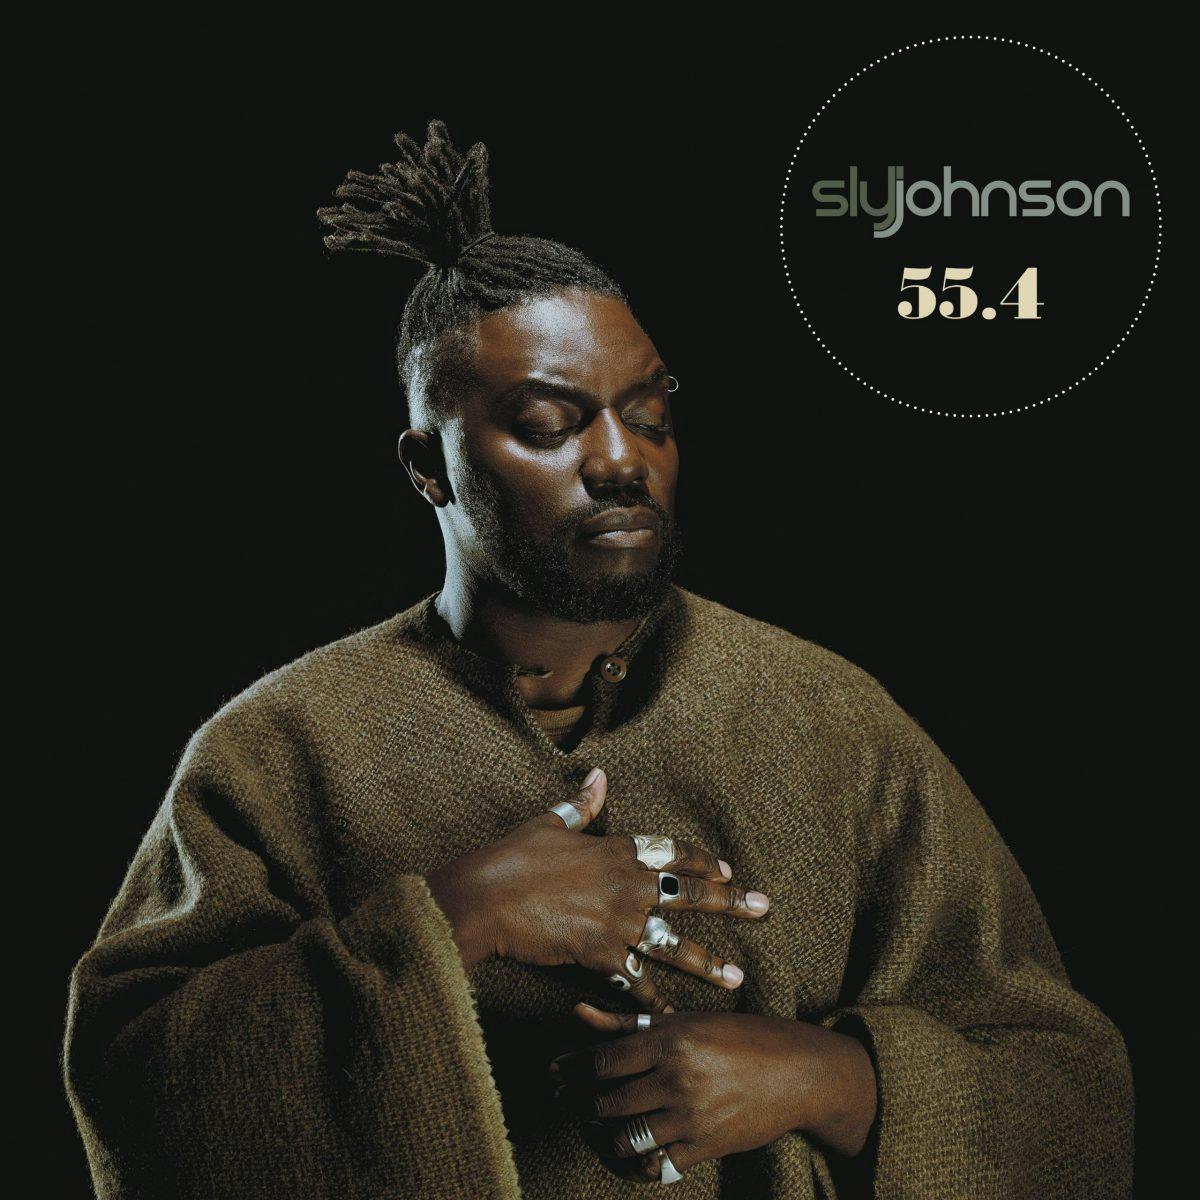 French vocalist, beatboxer, songwriter and producer Sly Johnson unveils 55.4, his much-anticipated fourth studio album, released on BBE Music.